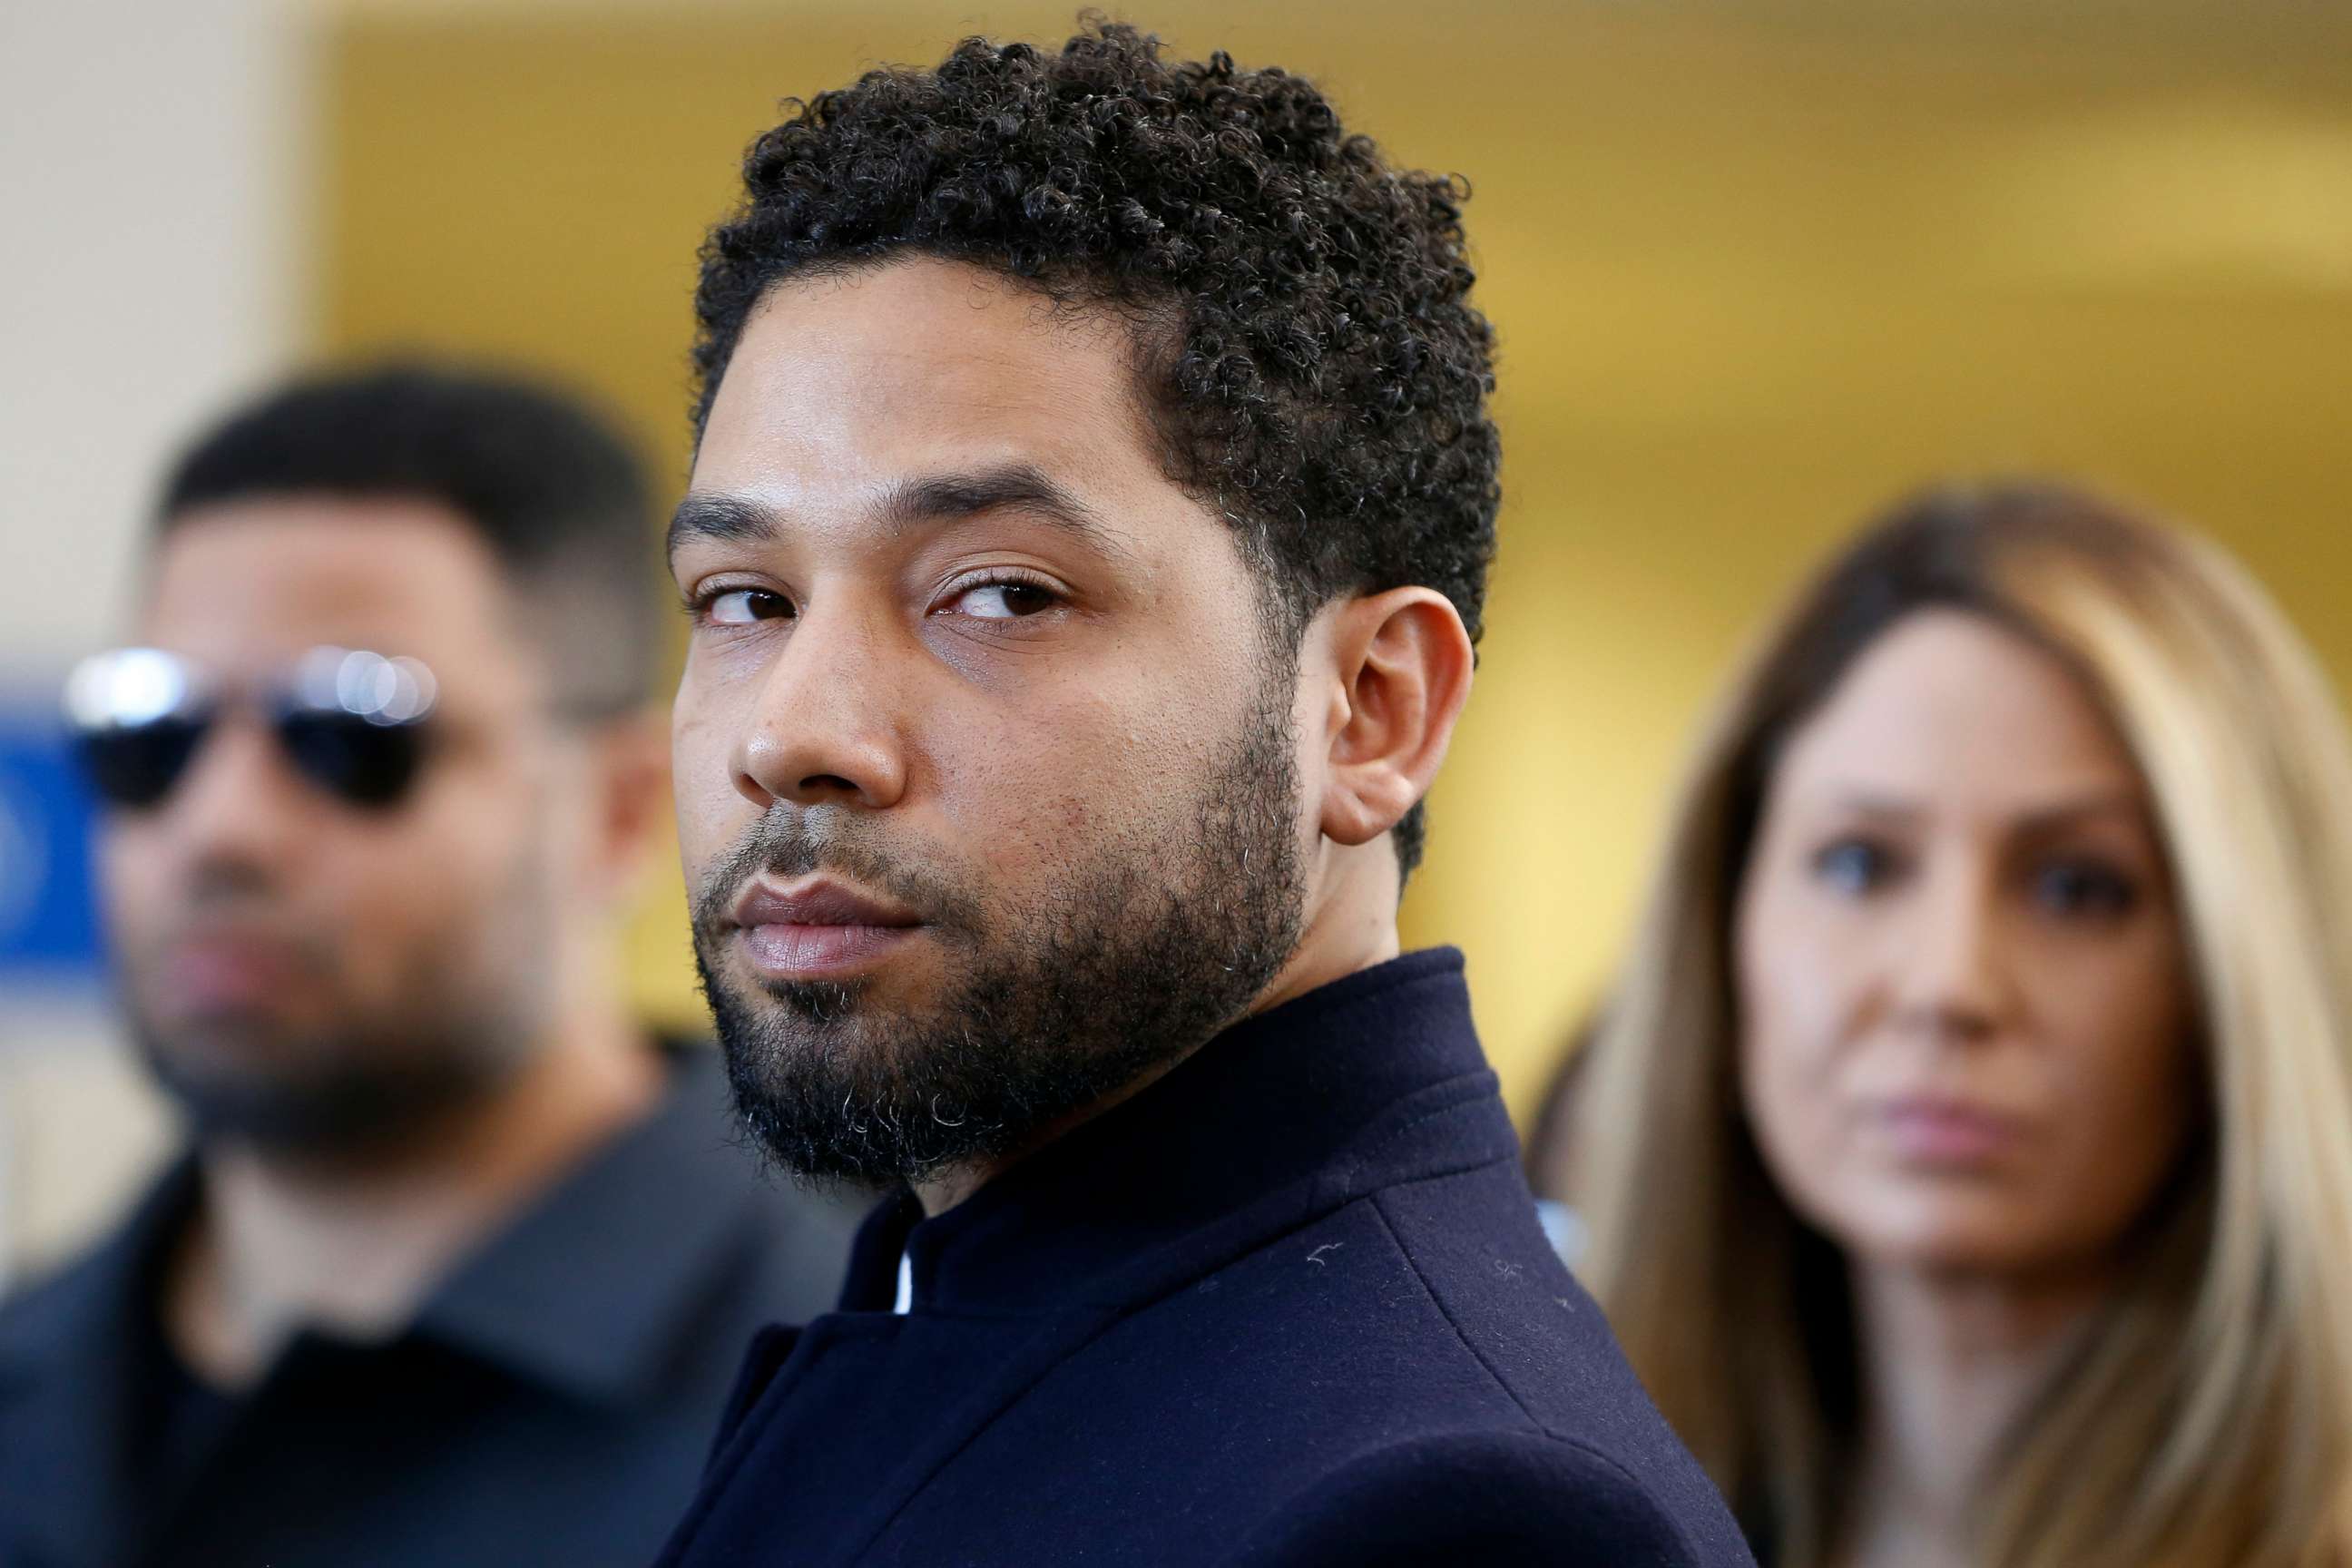 PHOTO: Jussie Smollett speaks with members of the media after his court appearance at Leighton Courthouse, March 26, 2019, in Chicago, Illinois.